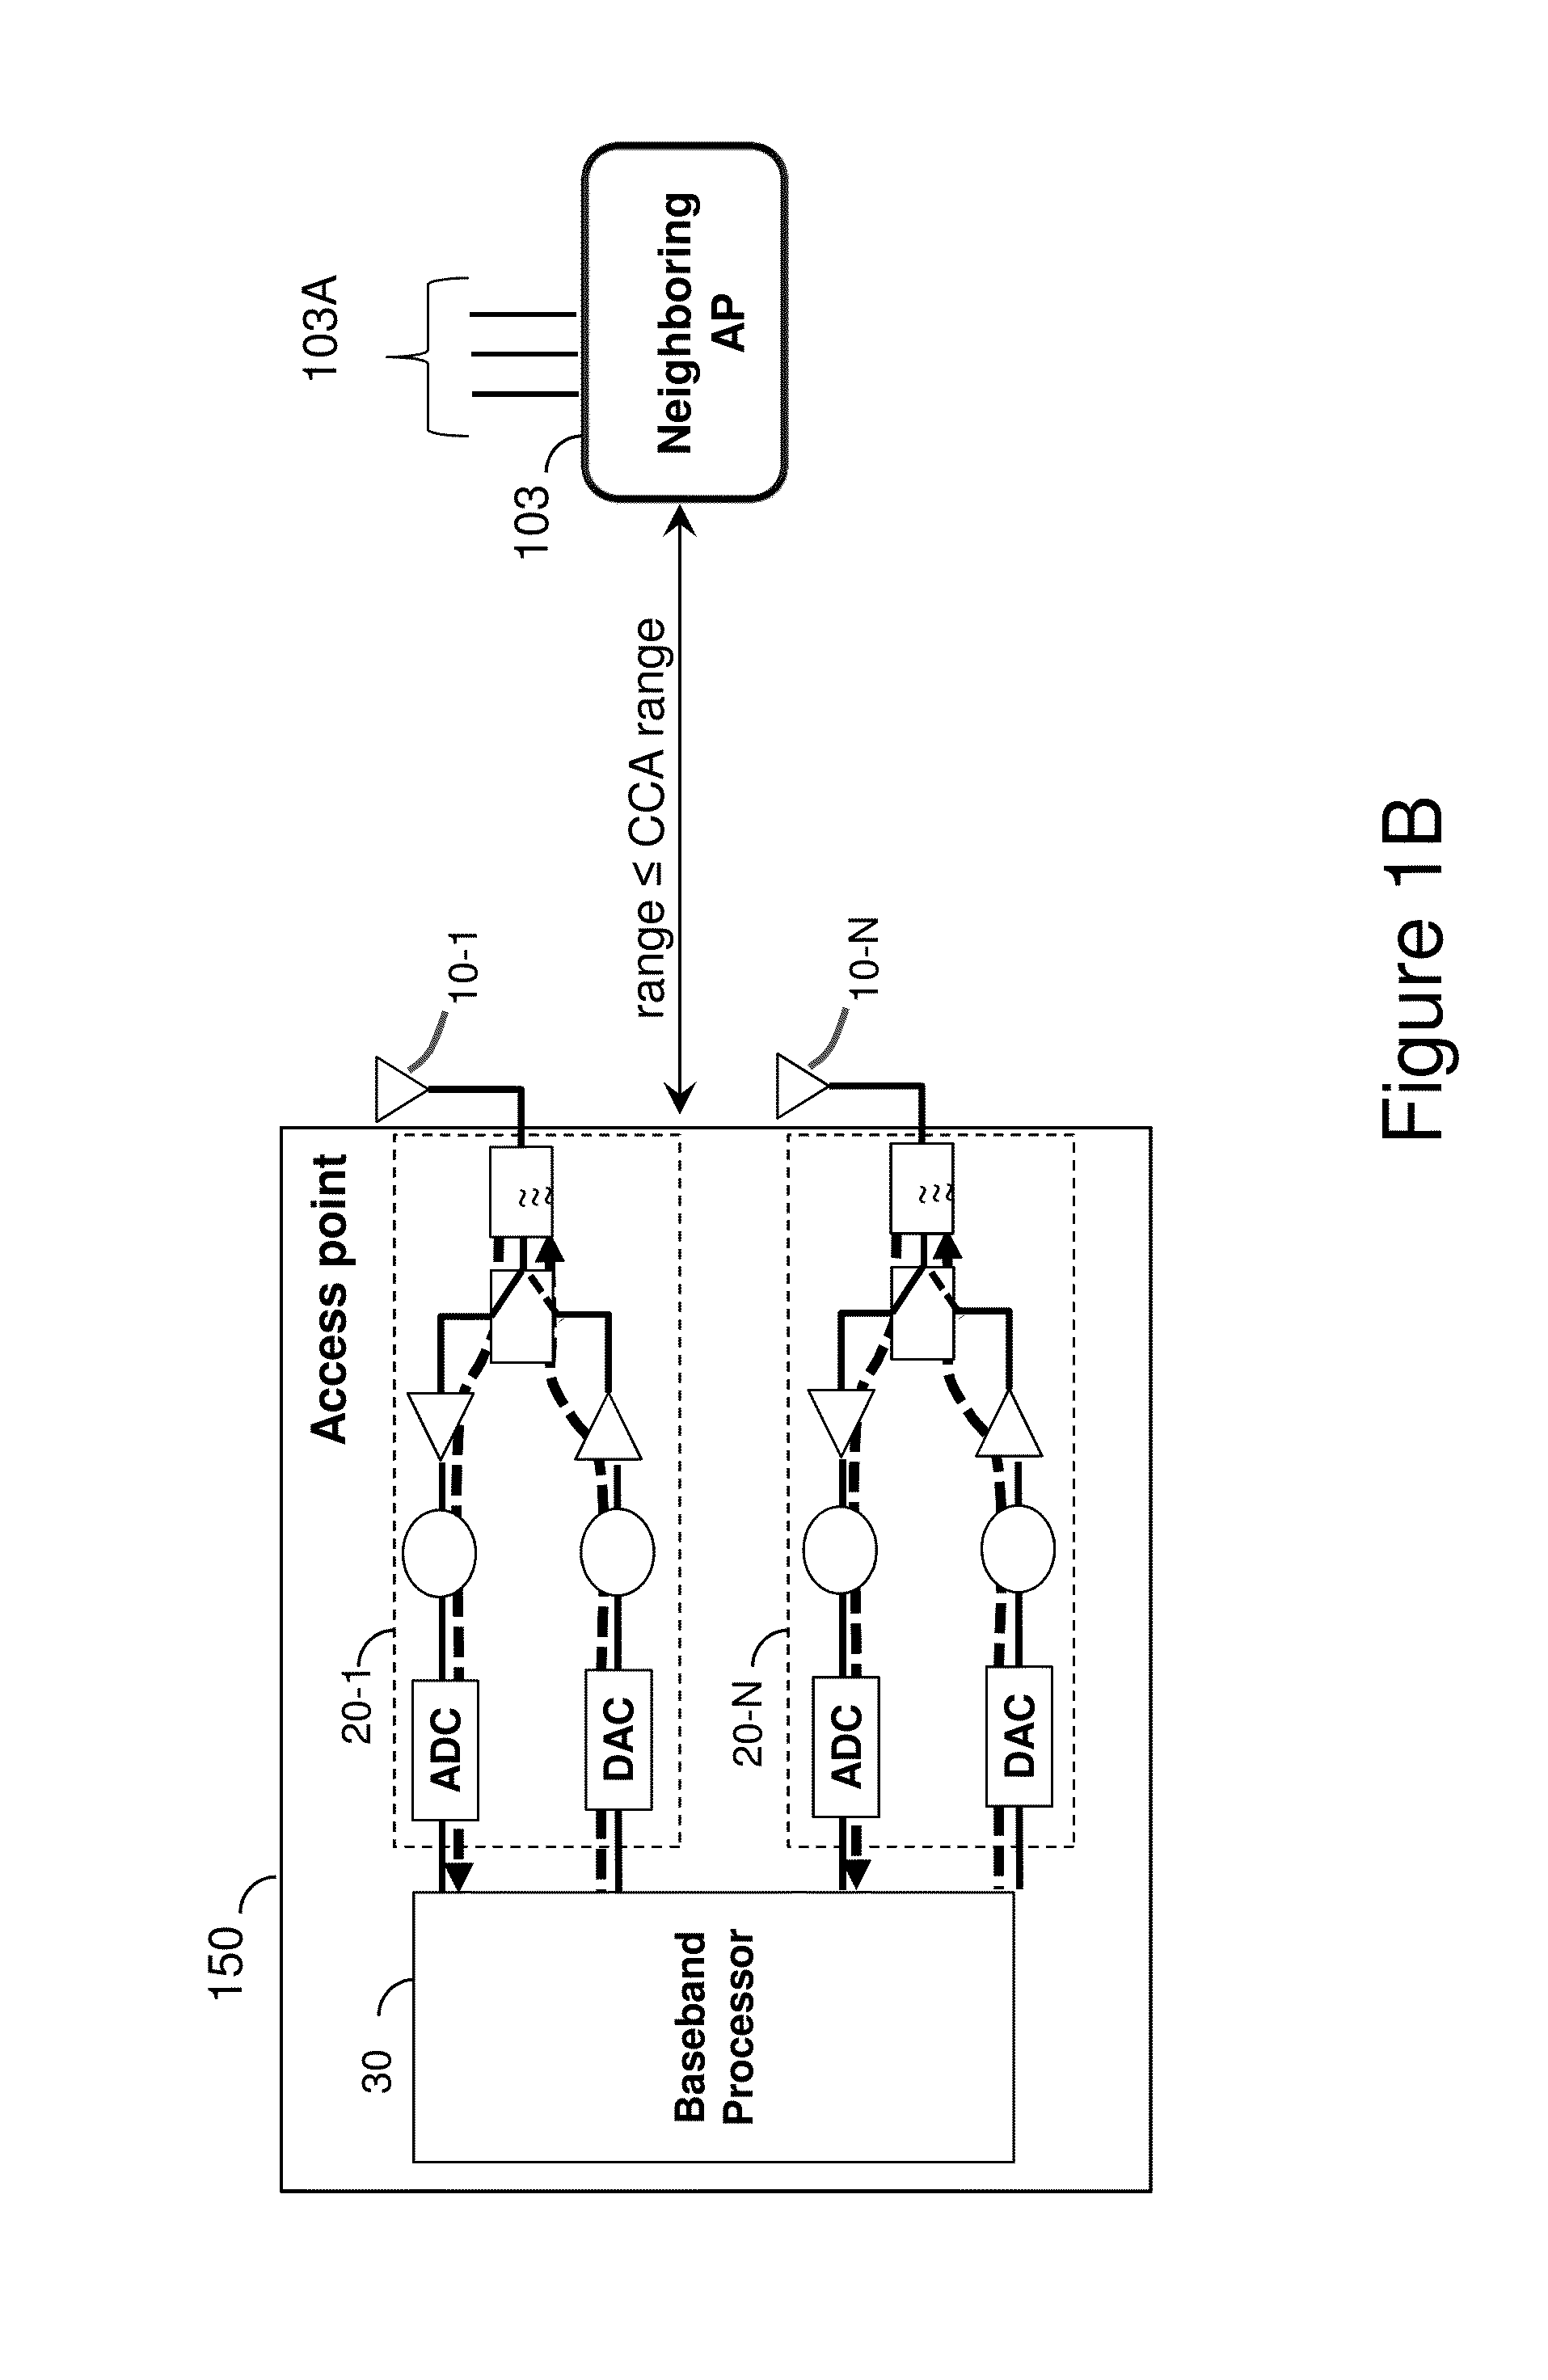 System and method for explicit channel sounding between access points